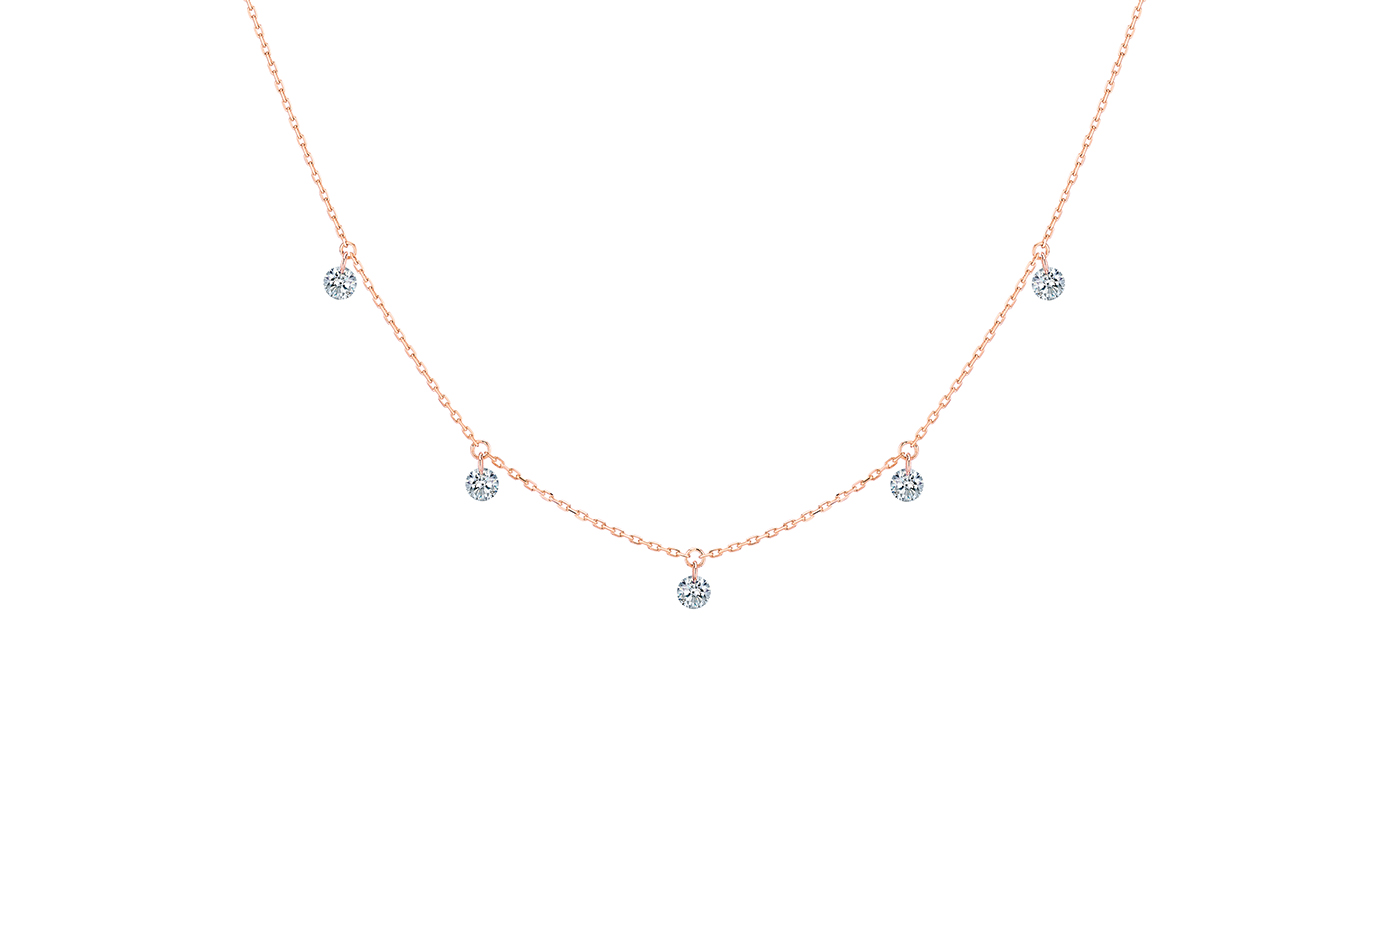 Collier 360° - 5 diamants, poids total 1 ct approx., or 18KT 1gr.